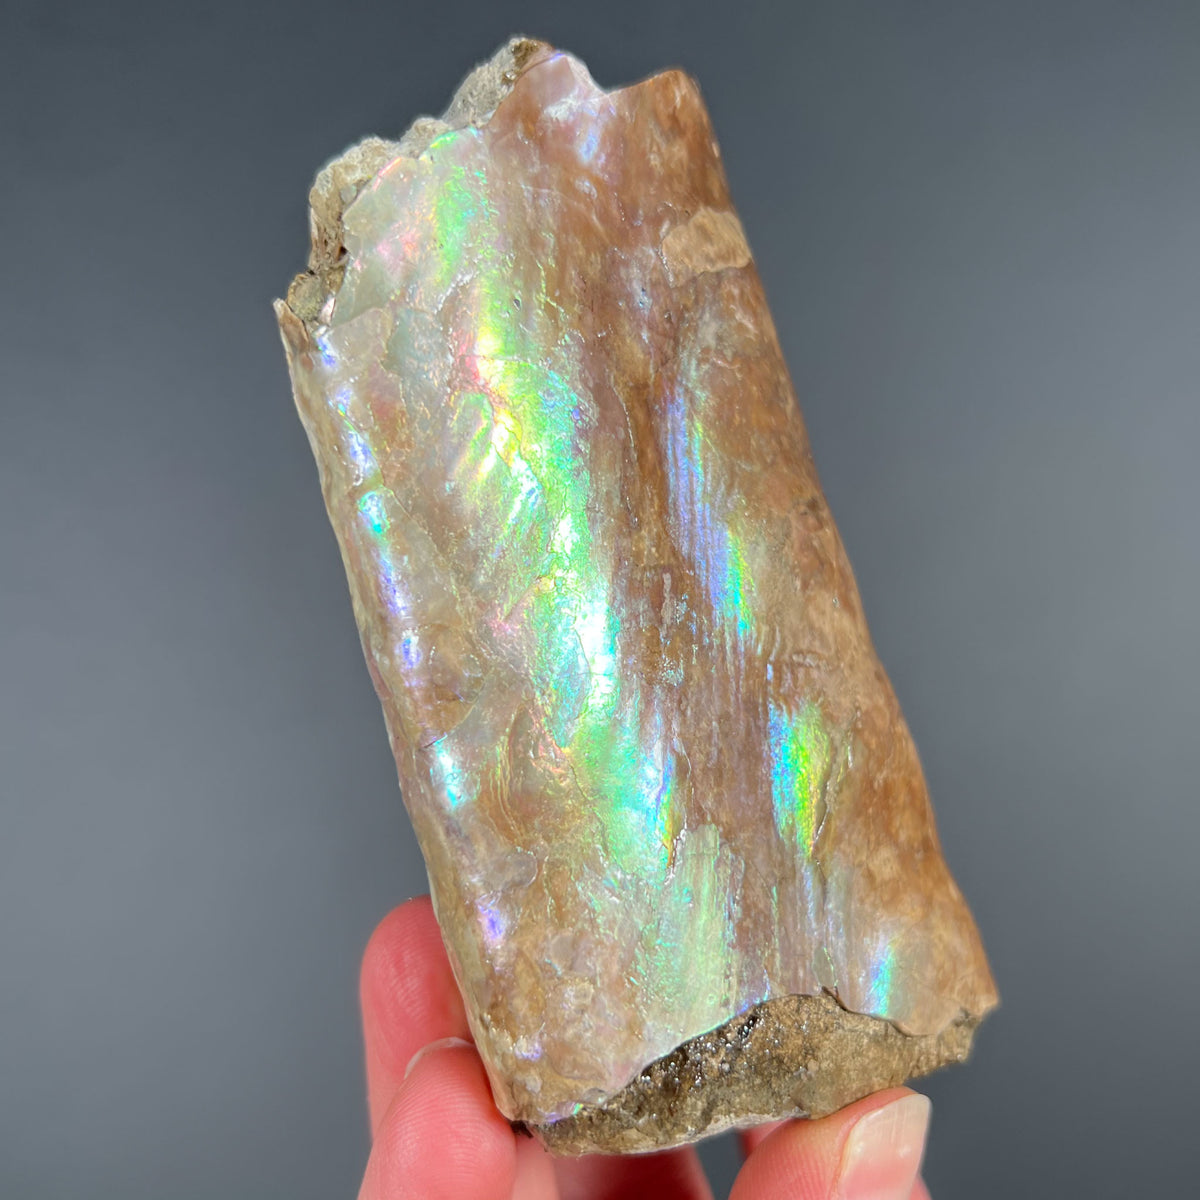 Iridescent Baculite Shell Fossil from South Dakota